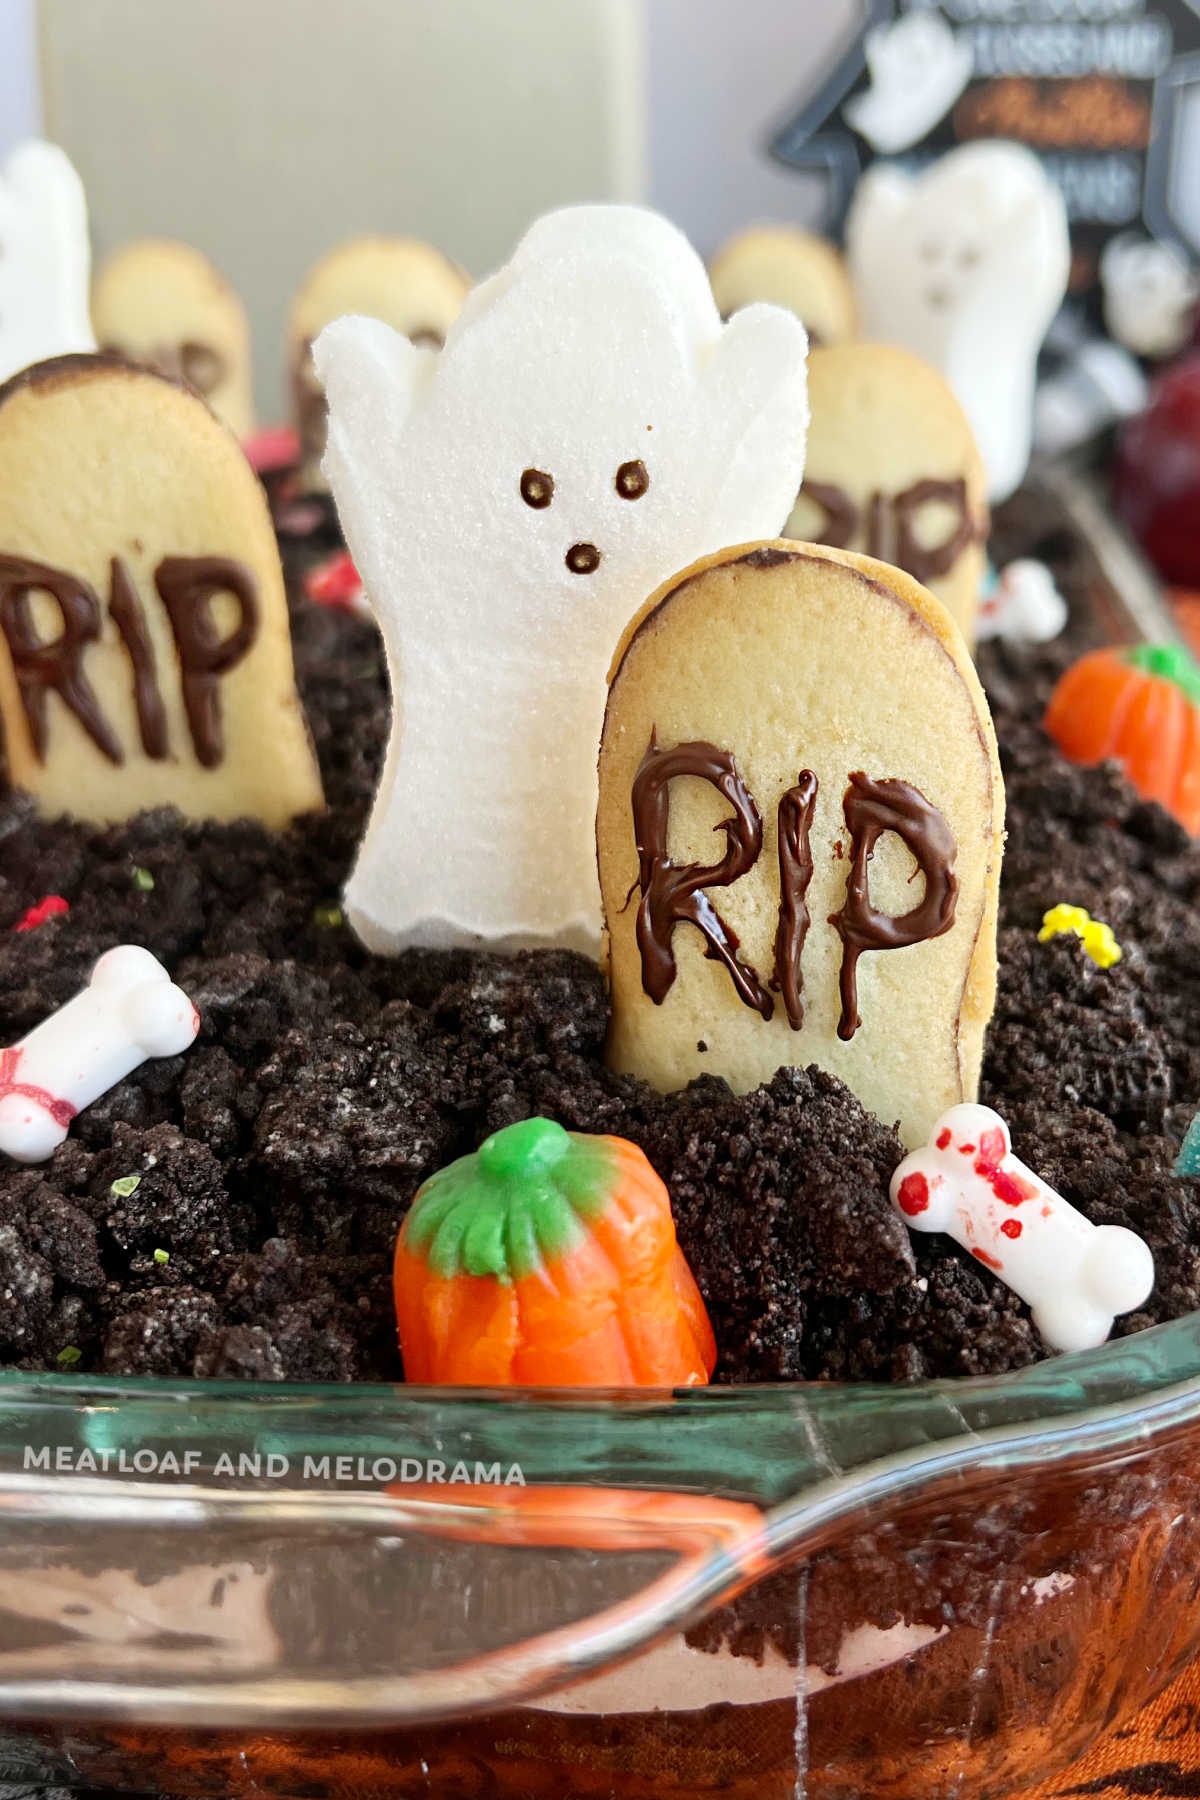 halloween dirt cake (graveyard cake) with ghost, pumpkins, gummy worms and gravestones in baking dish.